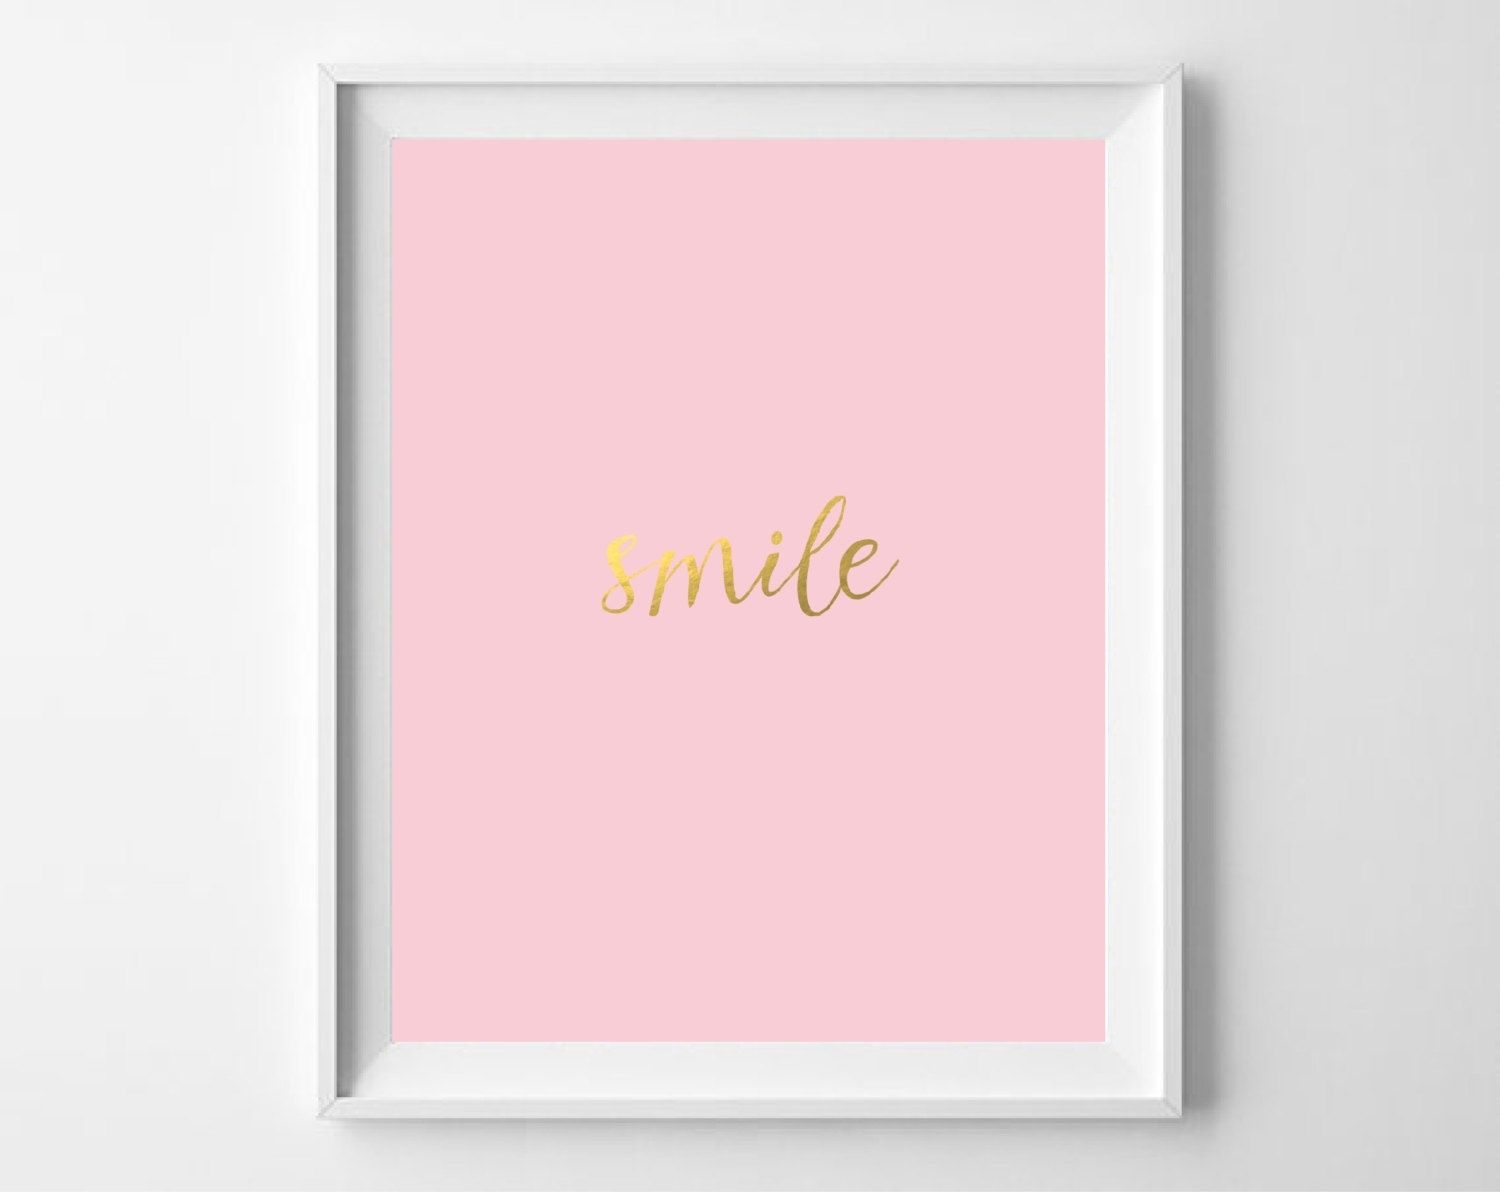 Smile Gold Foil Print Printable Blush Pink Gold Wall Art | Etsy In Gold Wall Art (View 15 of 20)